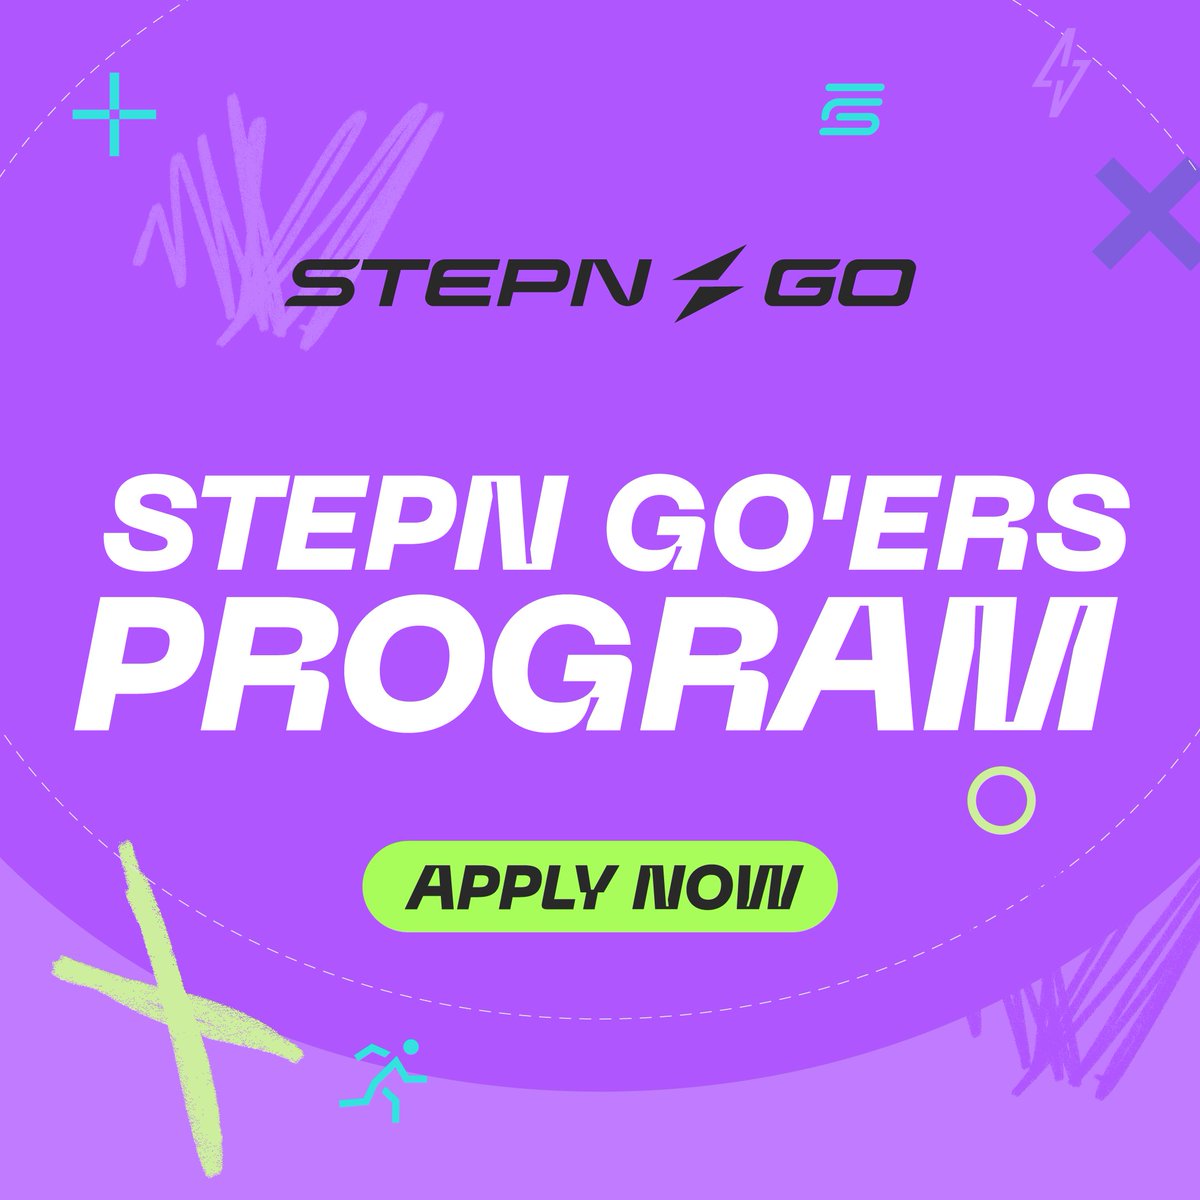 STEPN GO’ers Program ⚡️ We are thrilled to announce a new program designed to support the growth and adoption of #STEPNGO! And applications are open, let’s GO! 🏃‍♂️ As a STEPN GO’er, you'll help build the core community of STEPN GO, promote healthy living, and, of course, earn